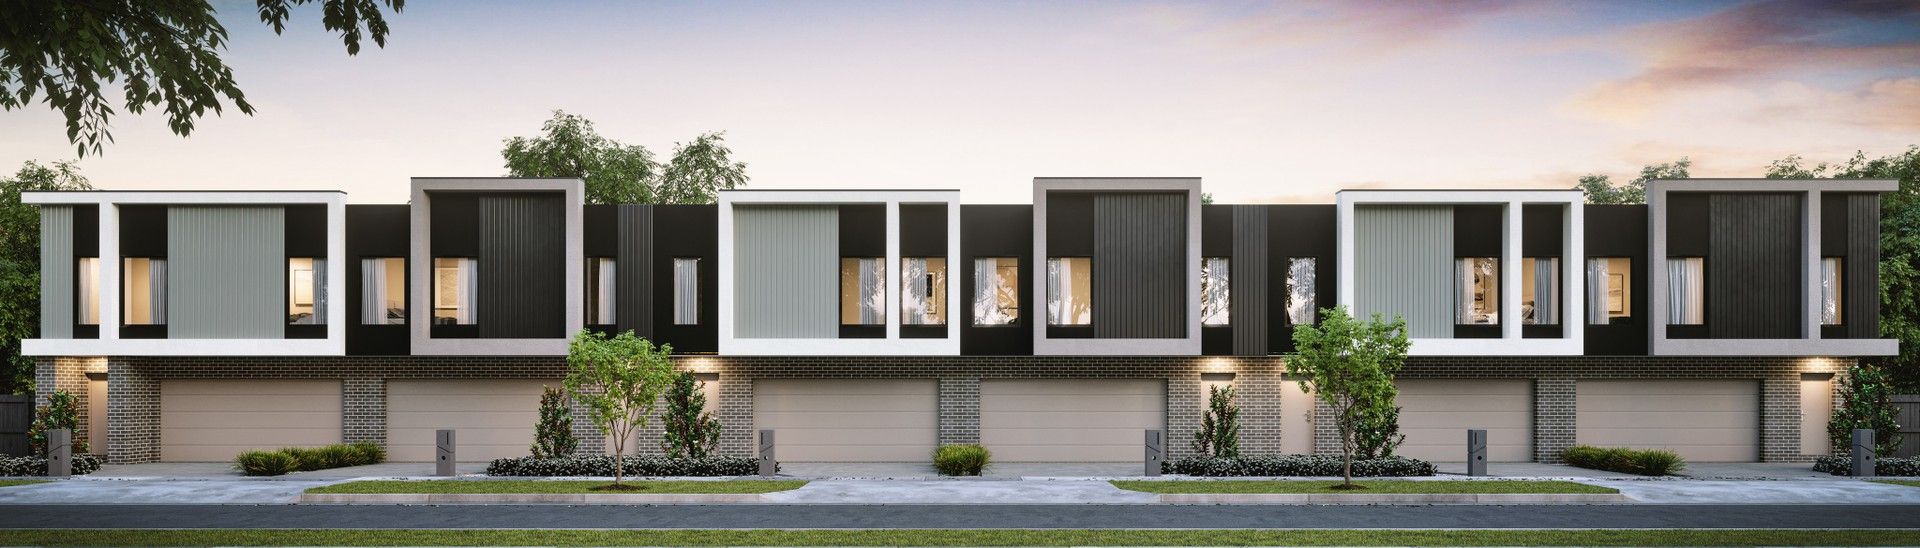 Protea Townhome by Nostra Homes, Mickleham VIC 3064, Image 0